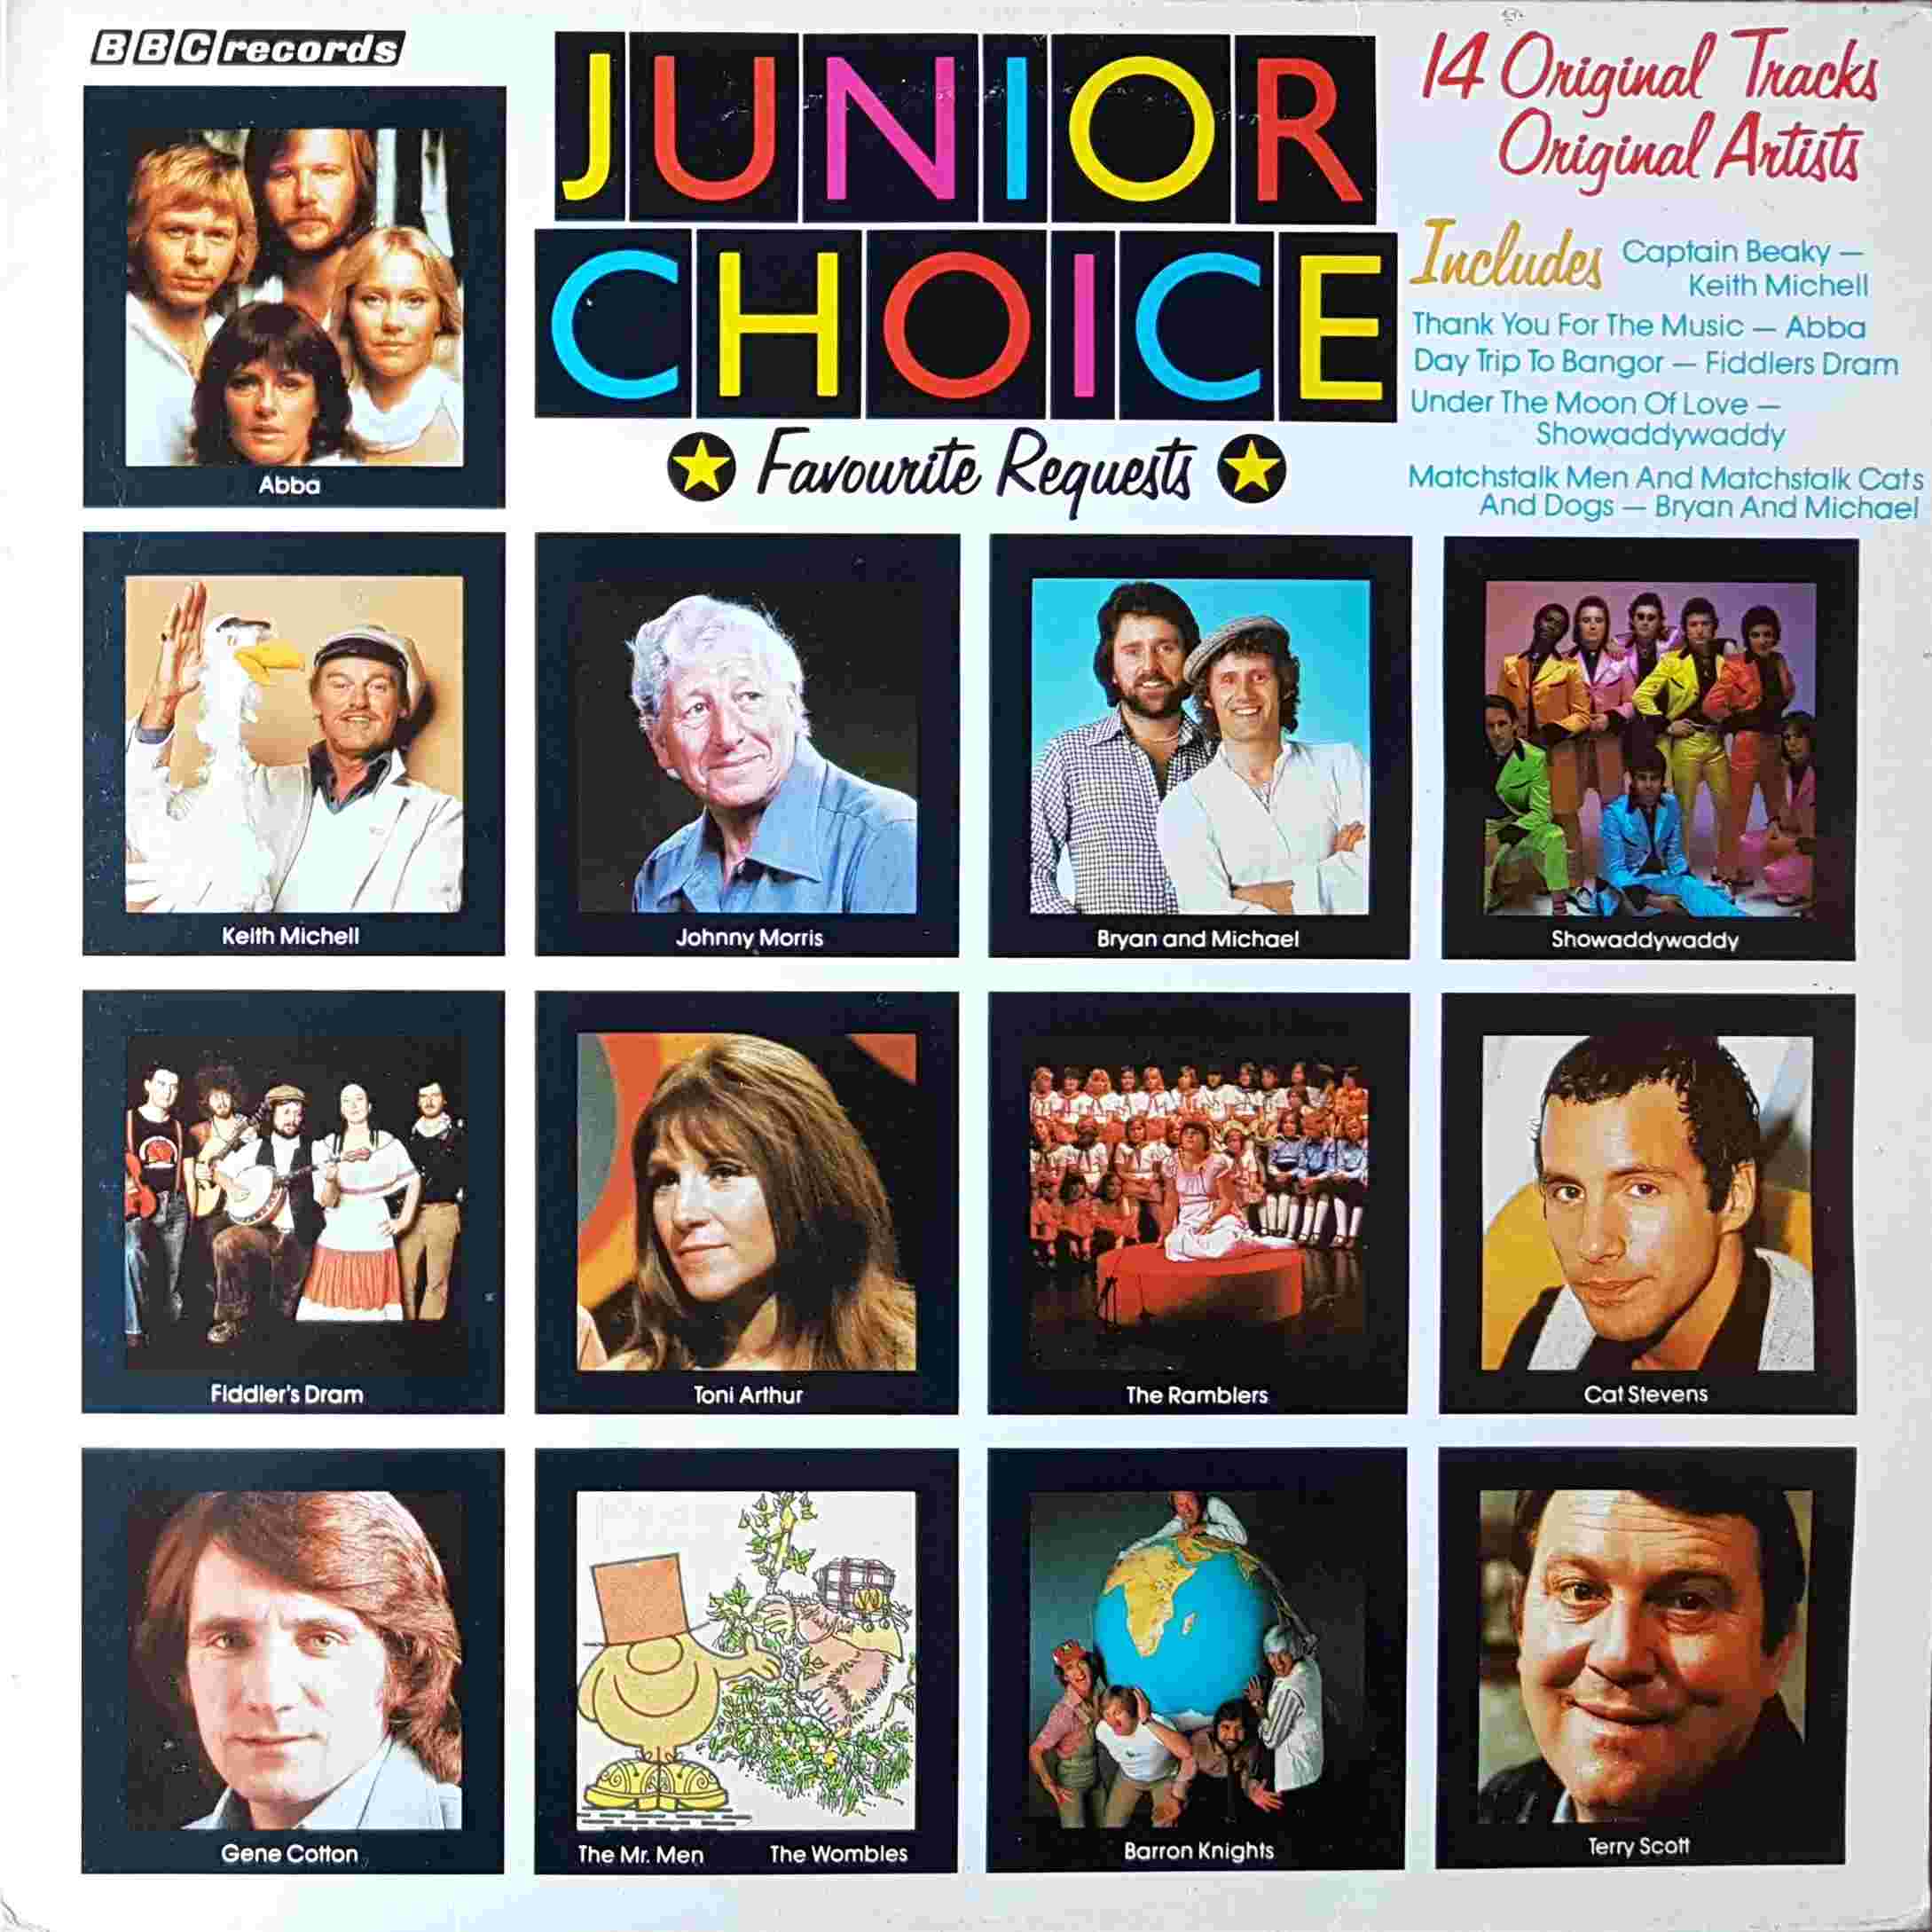 Picture of REH 396 Junior choice 'favourite requests' by artist Various from the BBC albums - Records and Tapes library